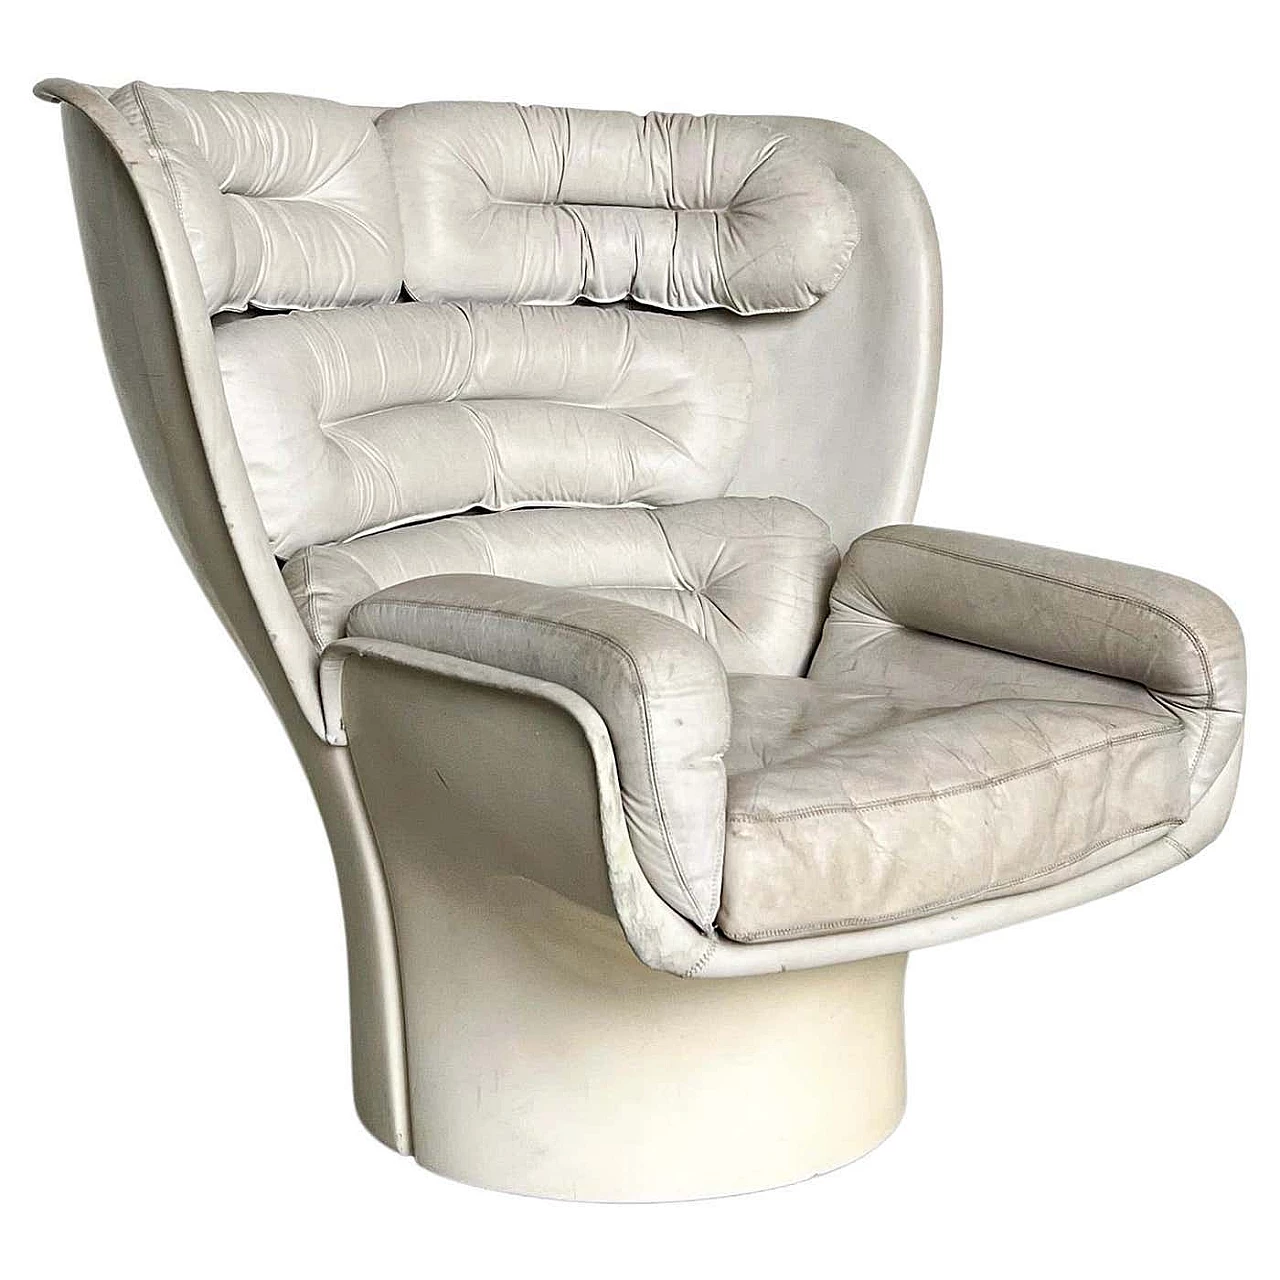 Elda white leather armchair by Joe Colombo for Comfort, 1960s 1